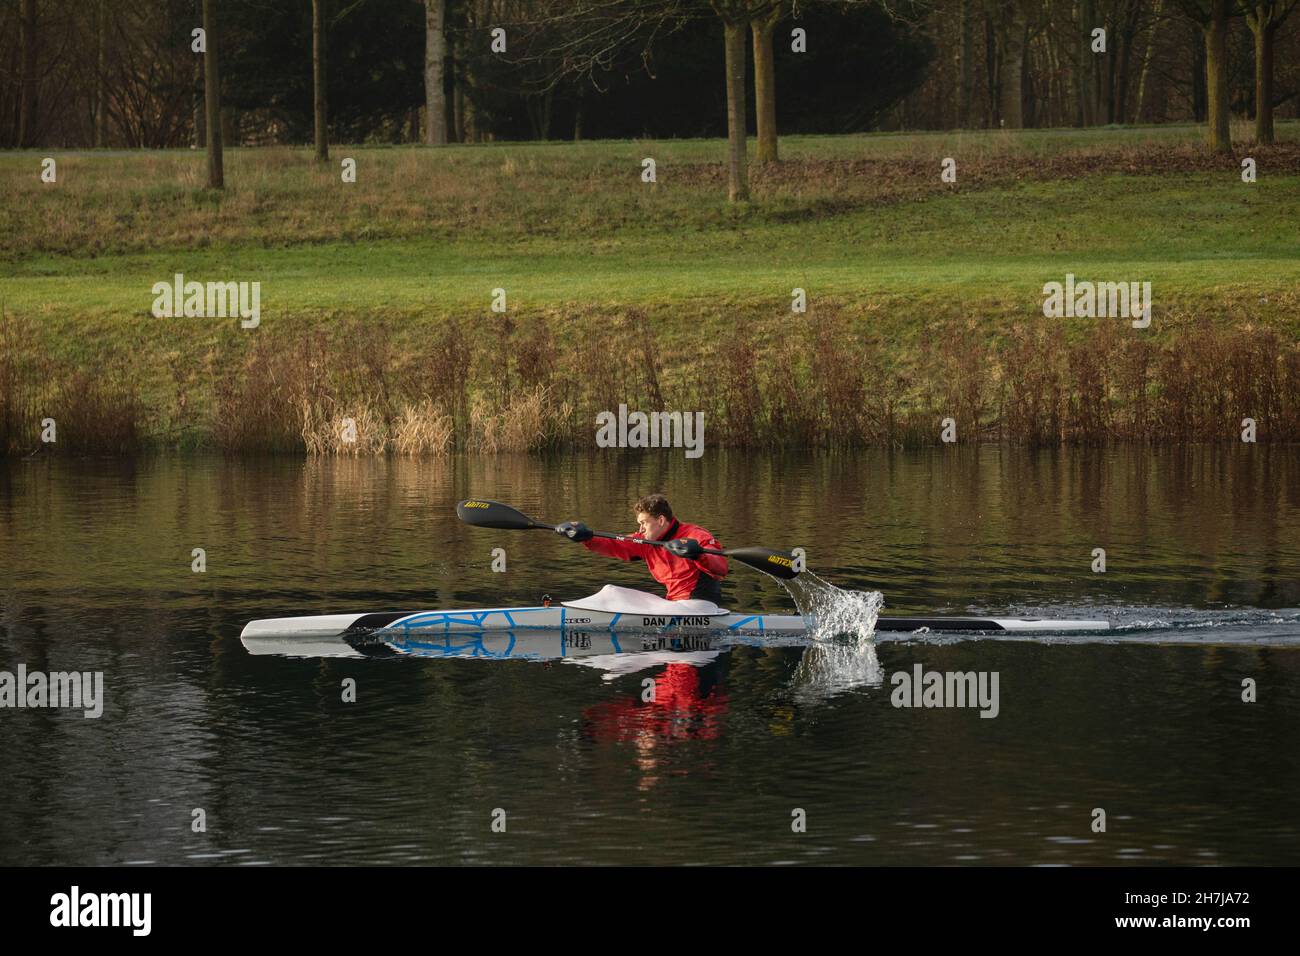 British sprint canoeist Dan Atkins during a morning training session at Dorney Lake on the 4th February 2021 in Buckinghamshire in the United Kingdom. Stock Photo